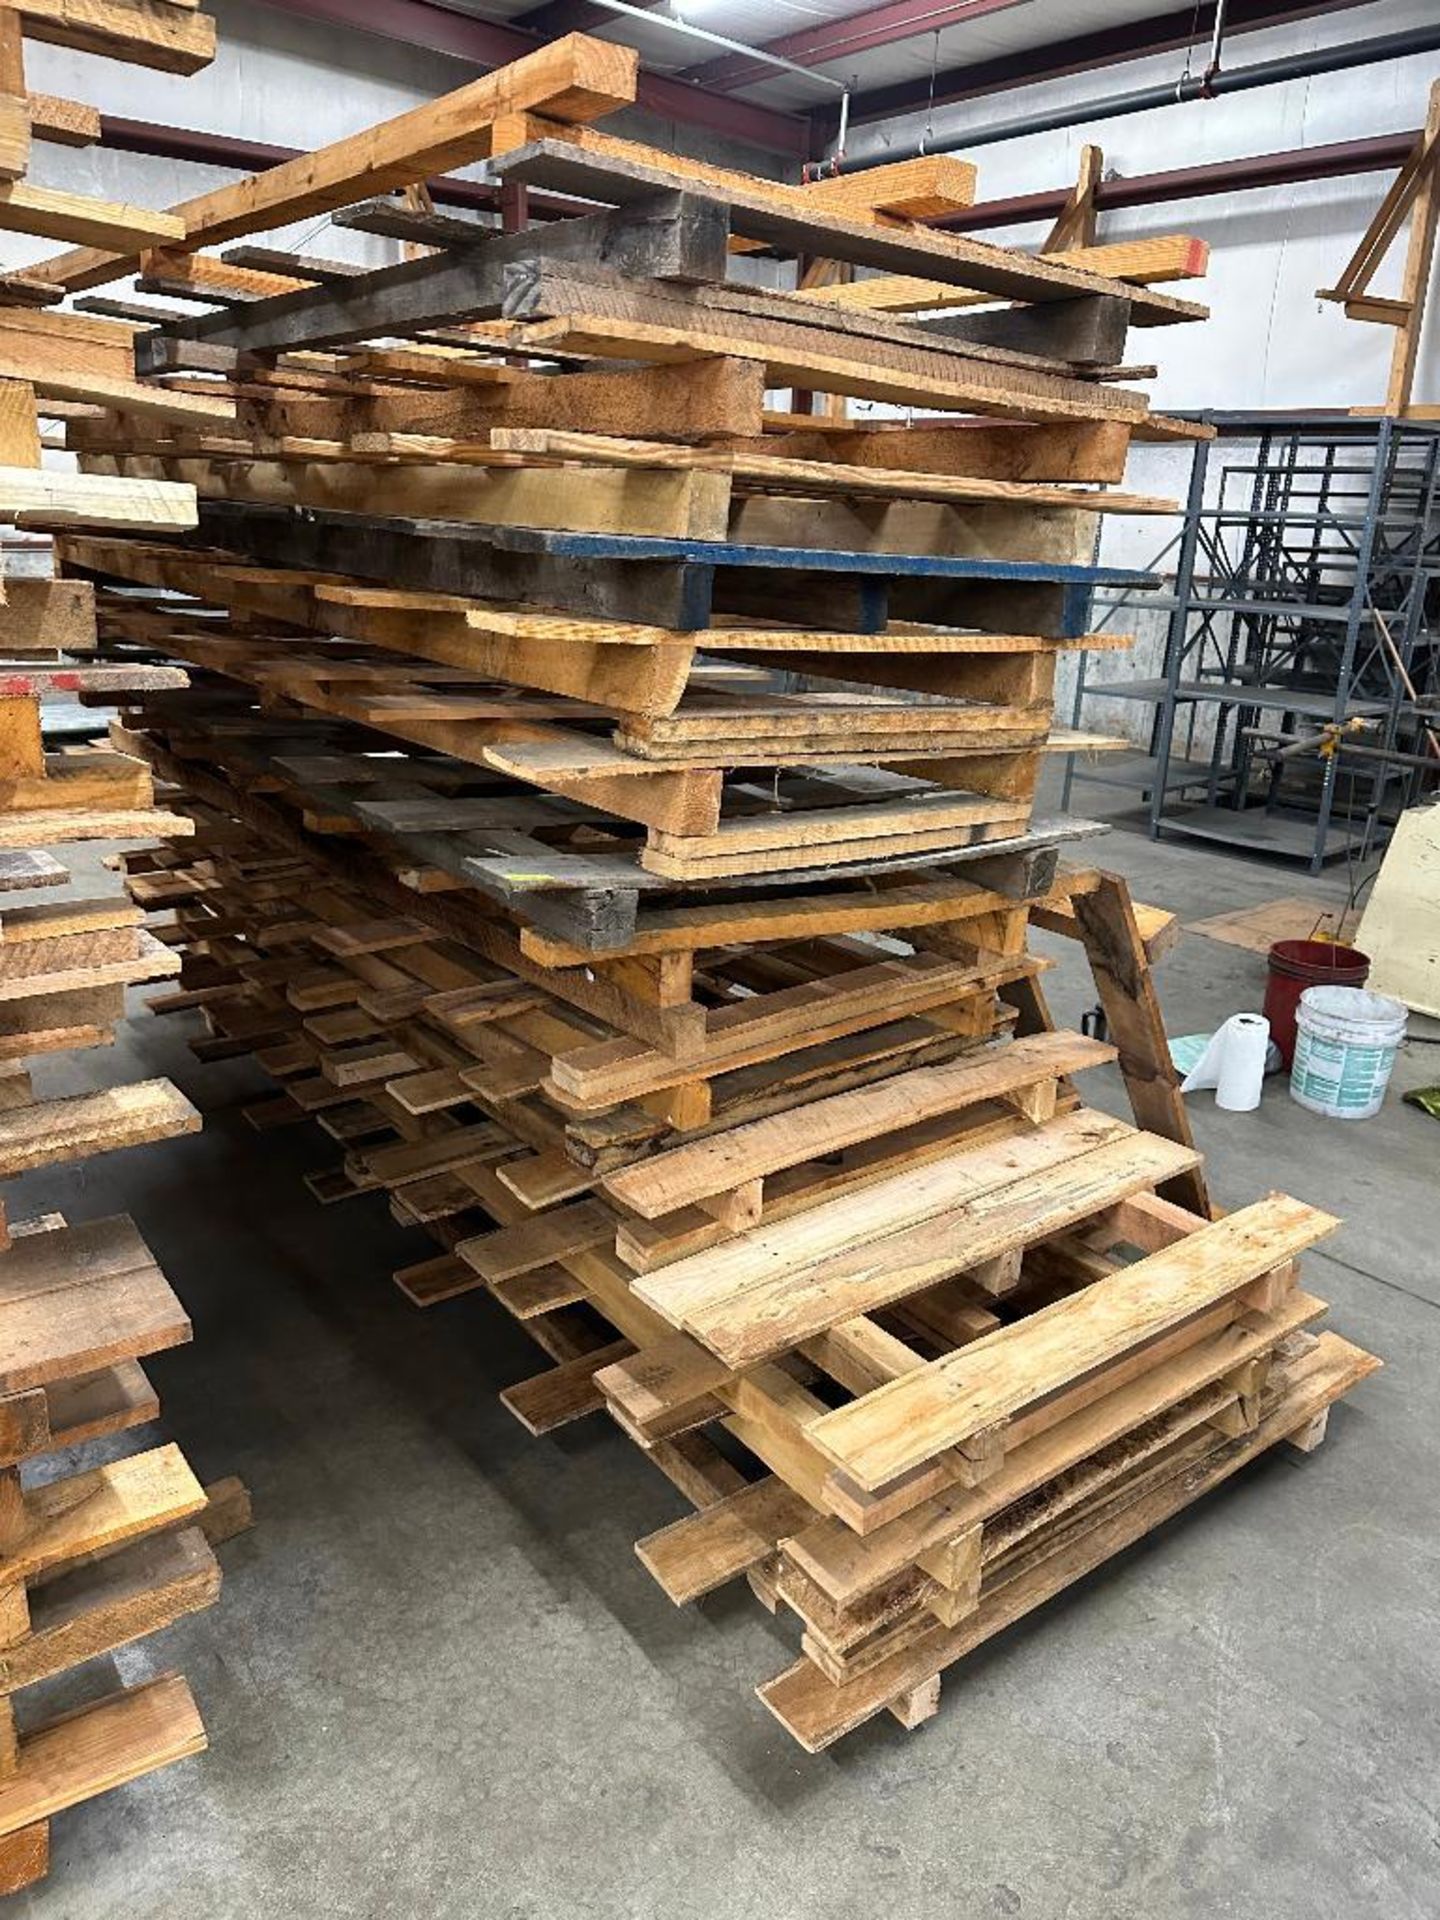 (16) WOOD SHIPPING PALLETS - VARIOUS SIZE